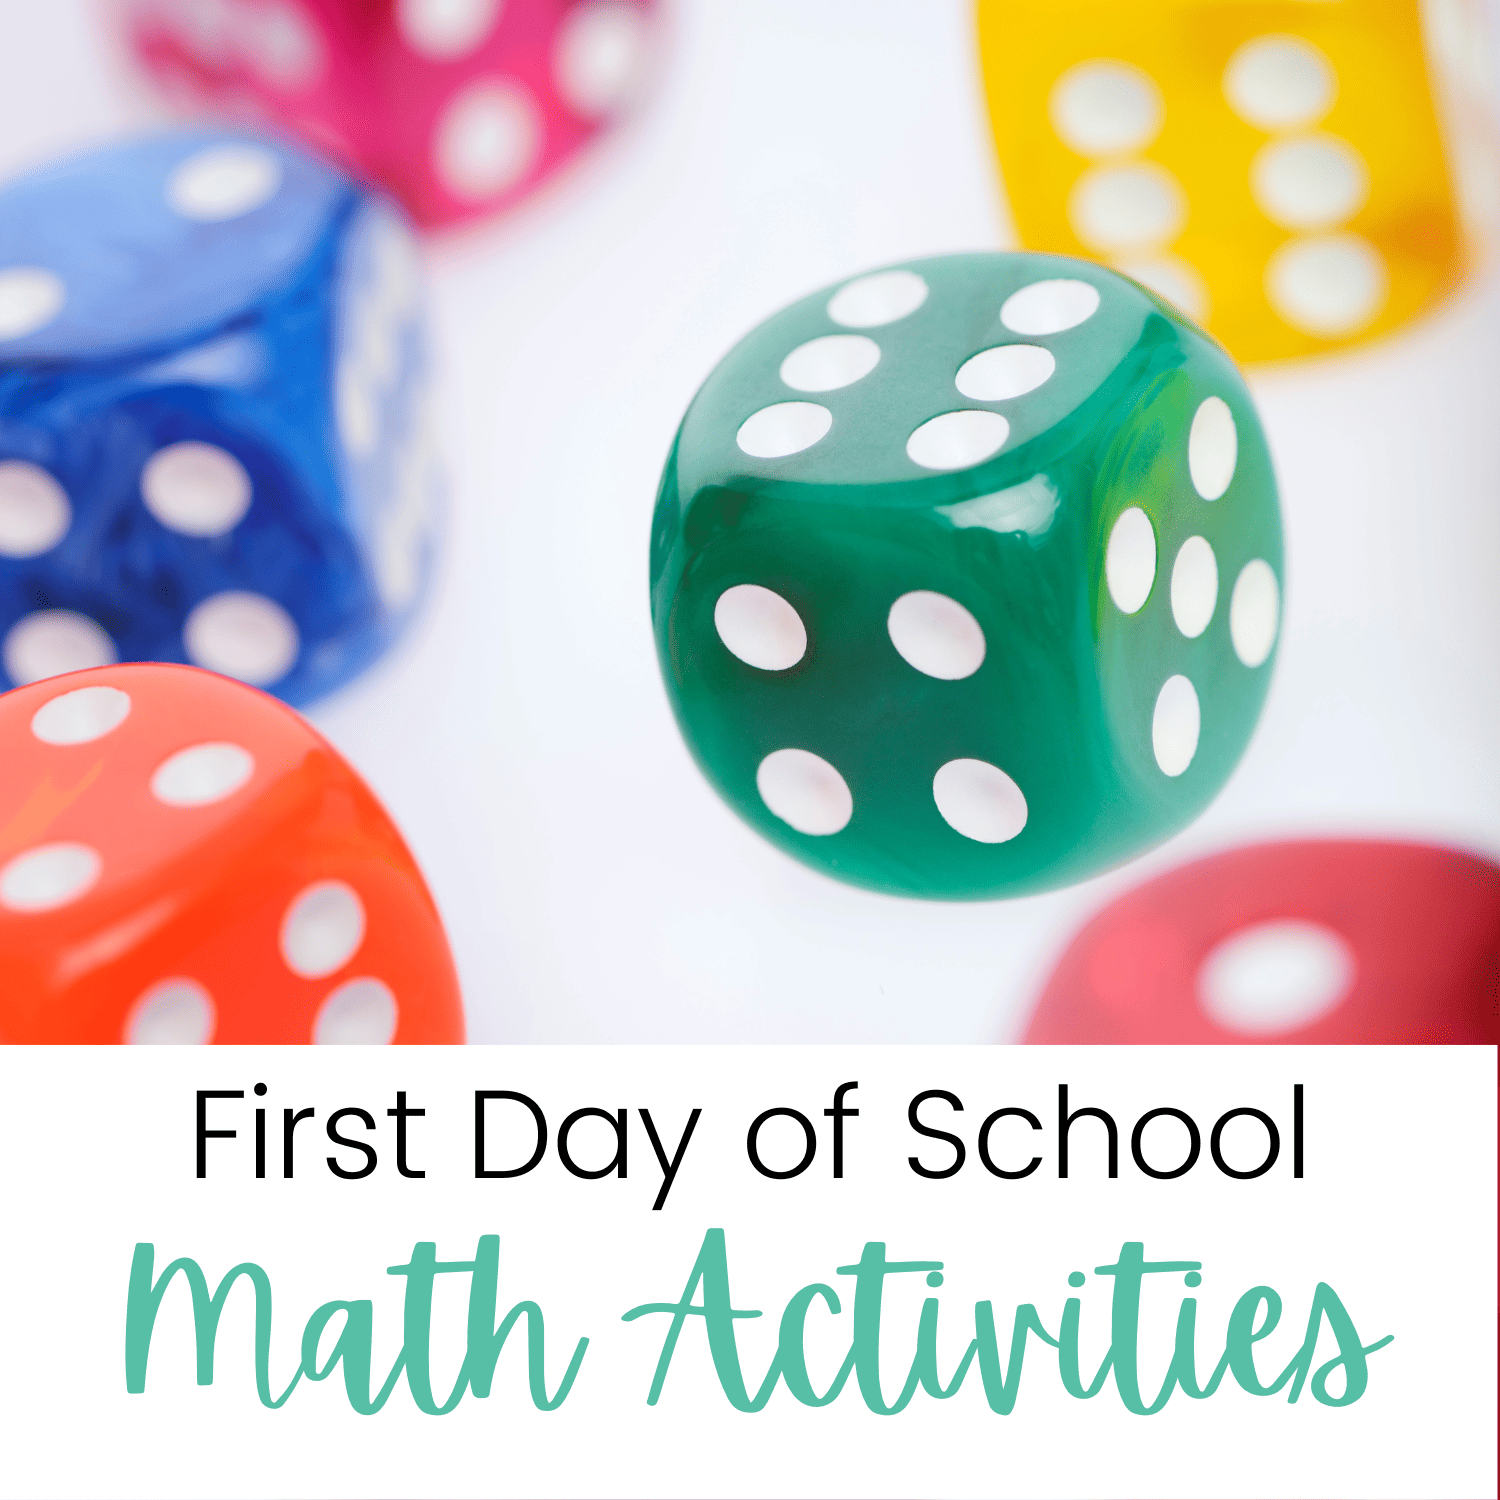 First Day of School Math Activities for Upper Elementary